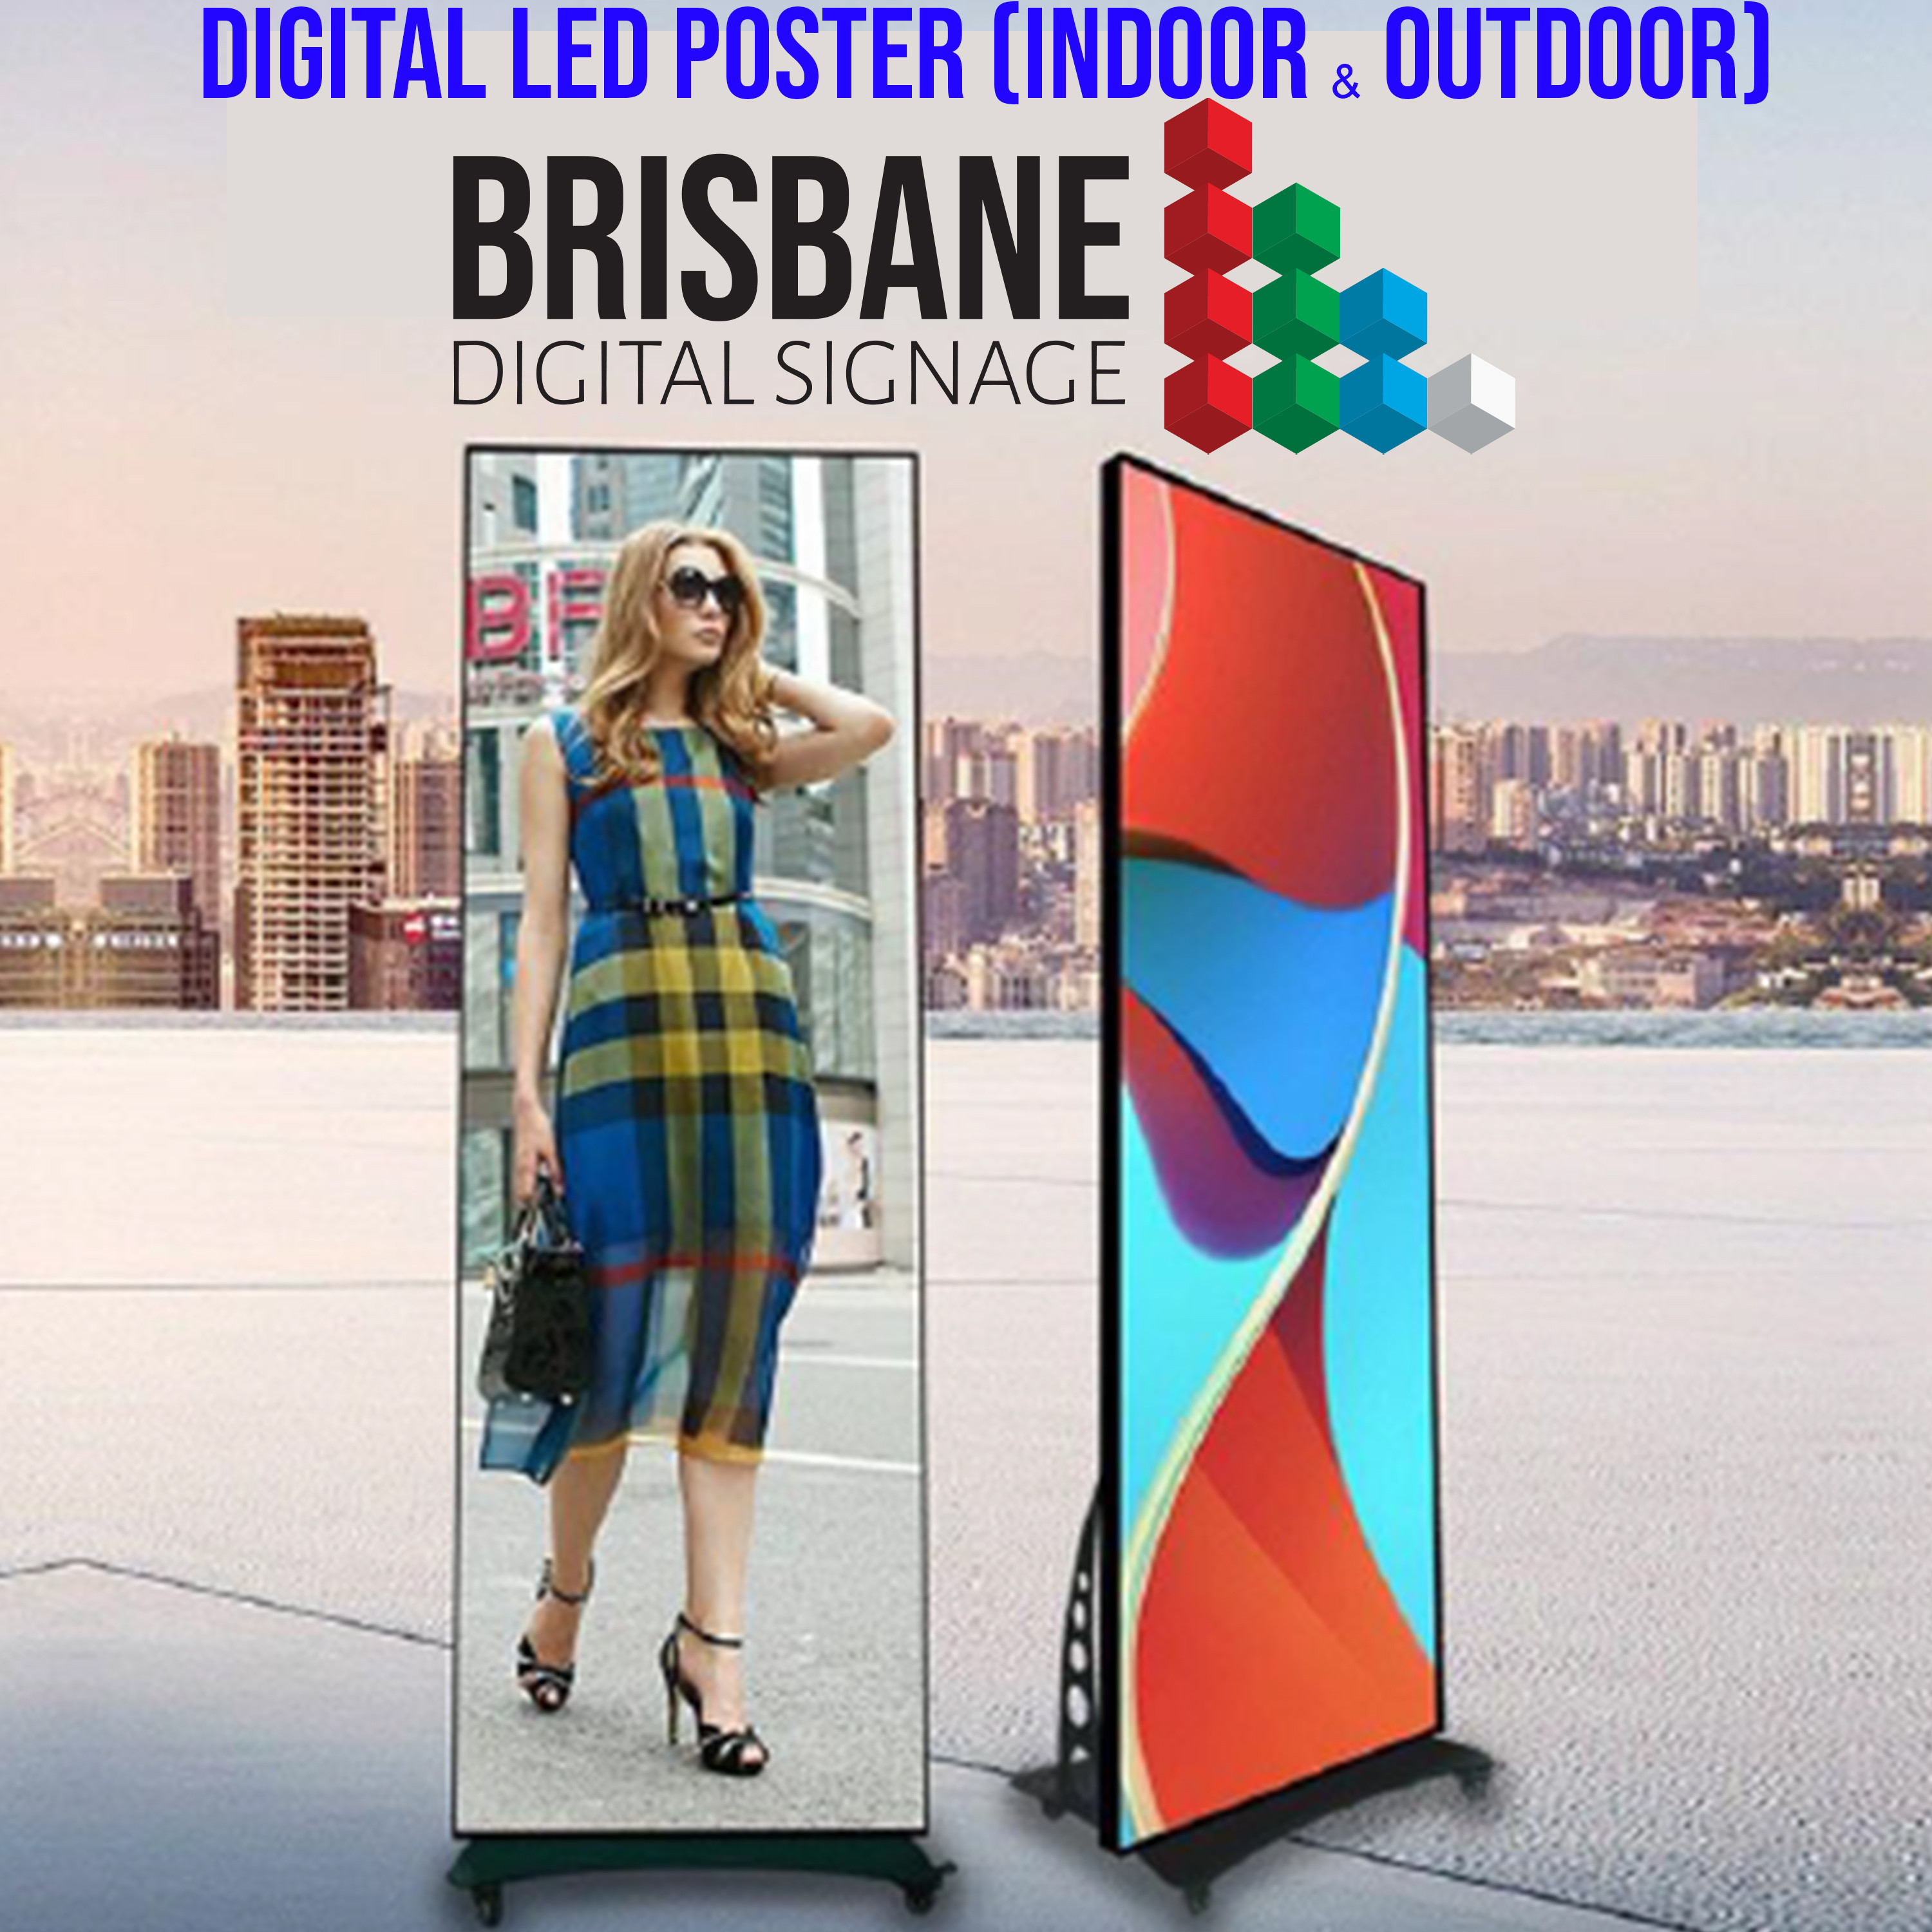 Digital LED Poster Indoor and Outdoor